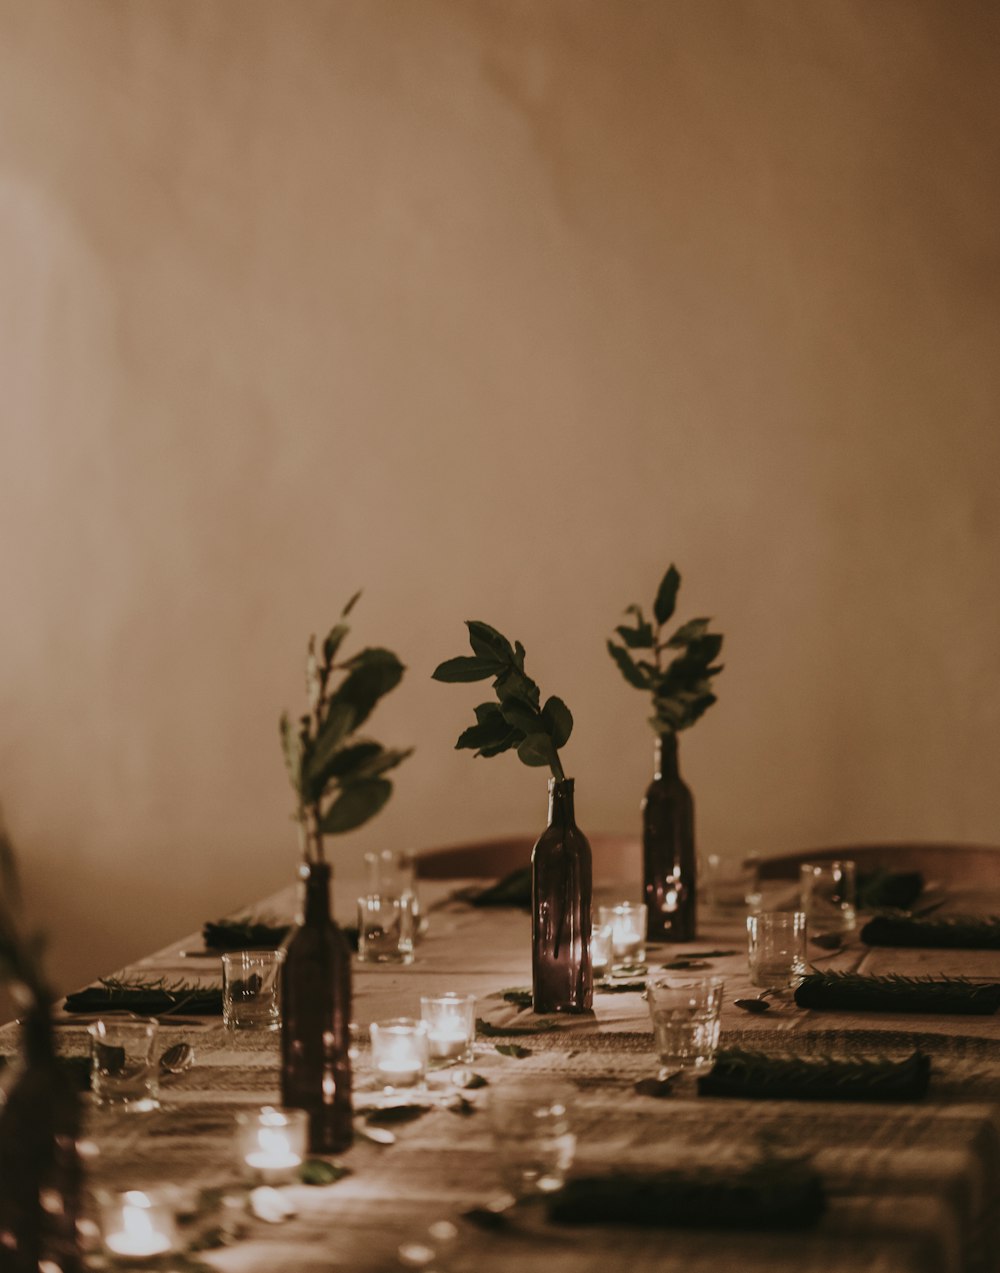 plants in bottle vases by turned on tealights on table